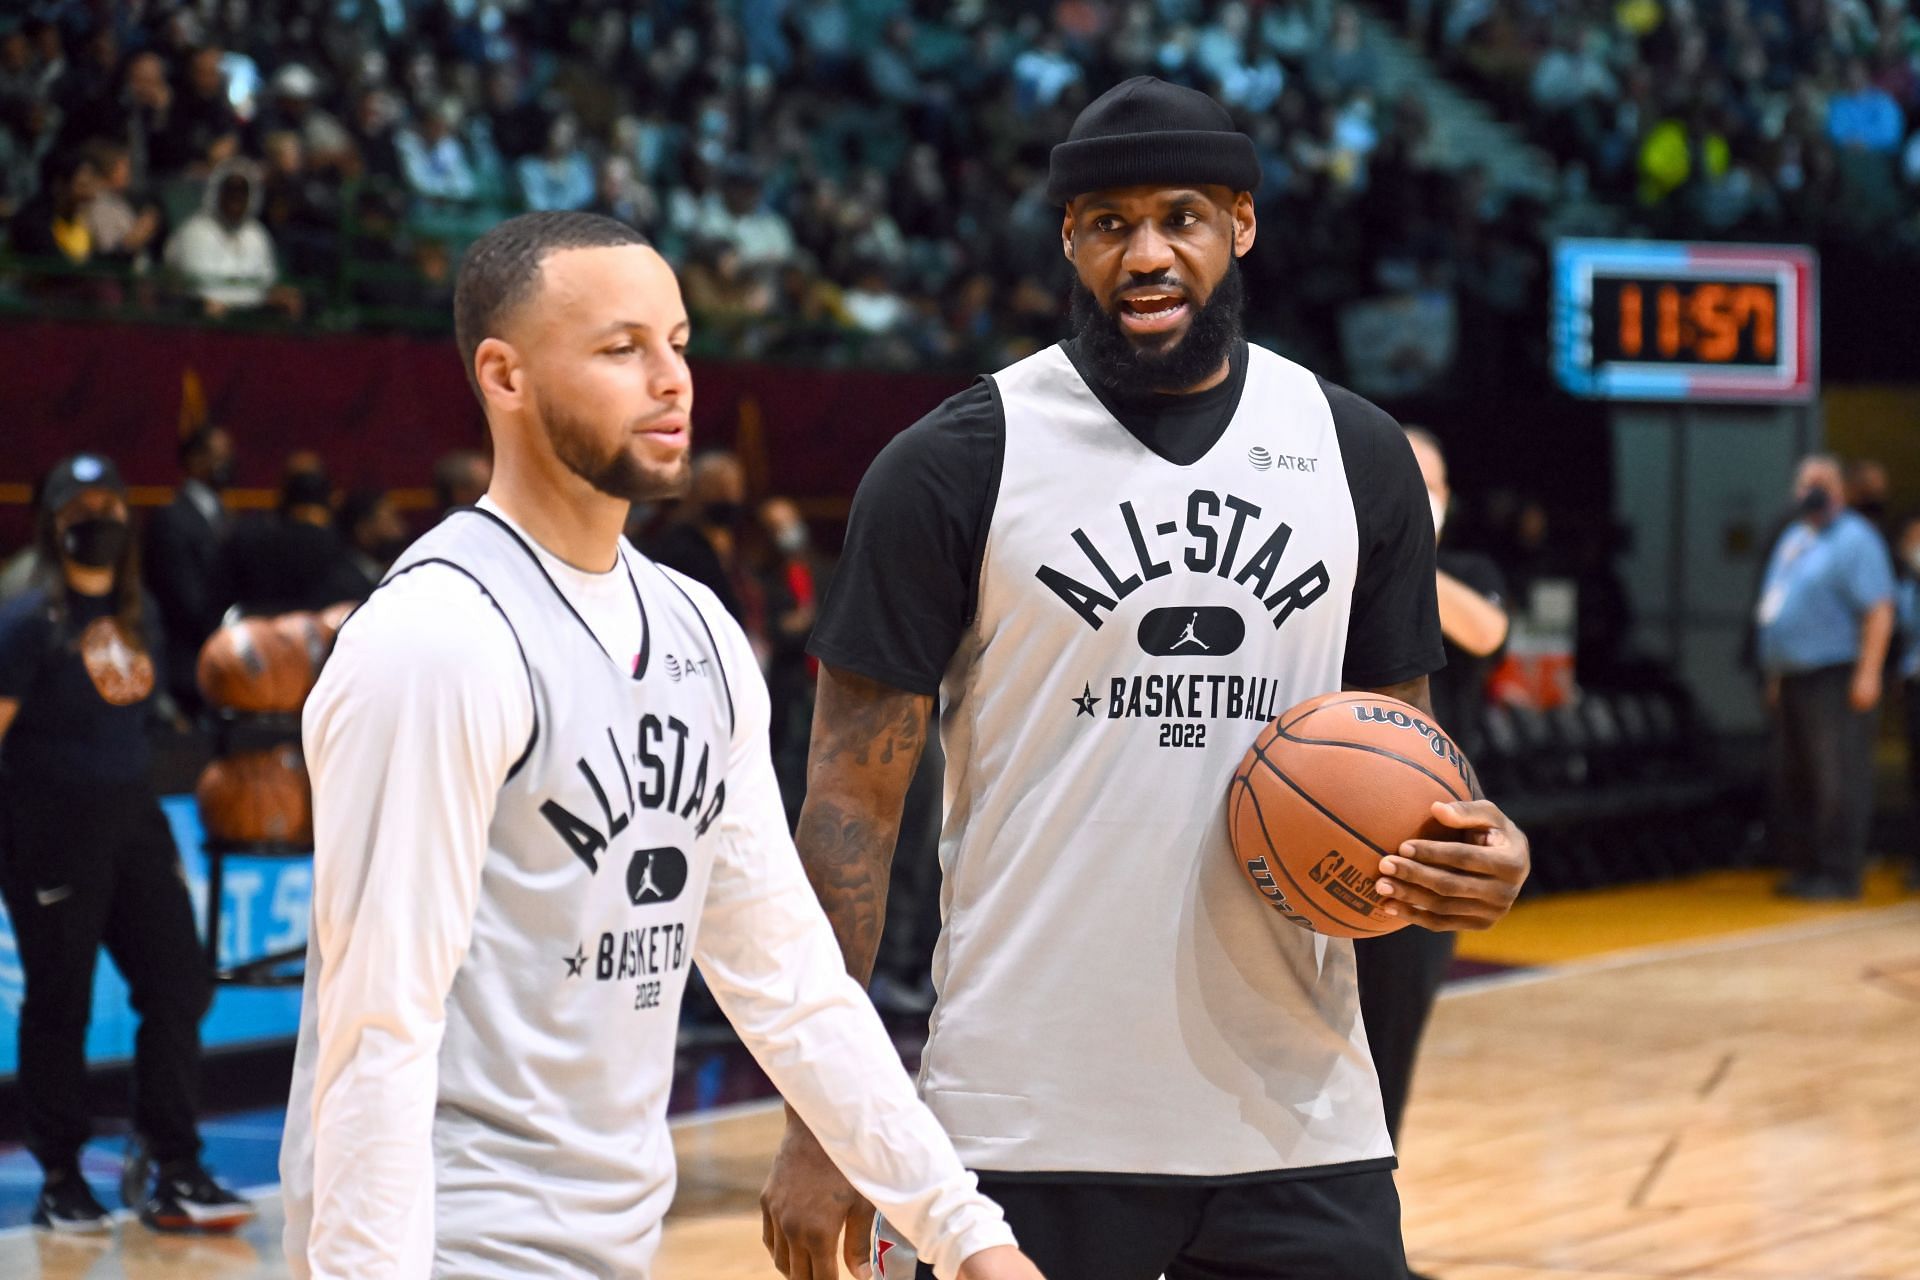 LeBron James and Steph Curry at the 2022 NBA All-Star Practice